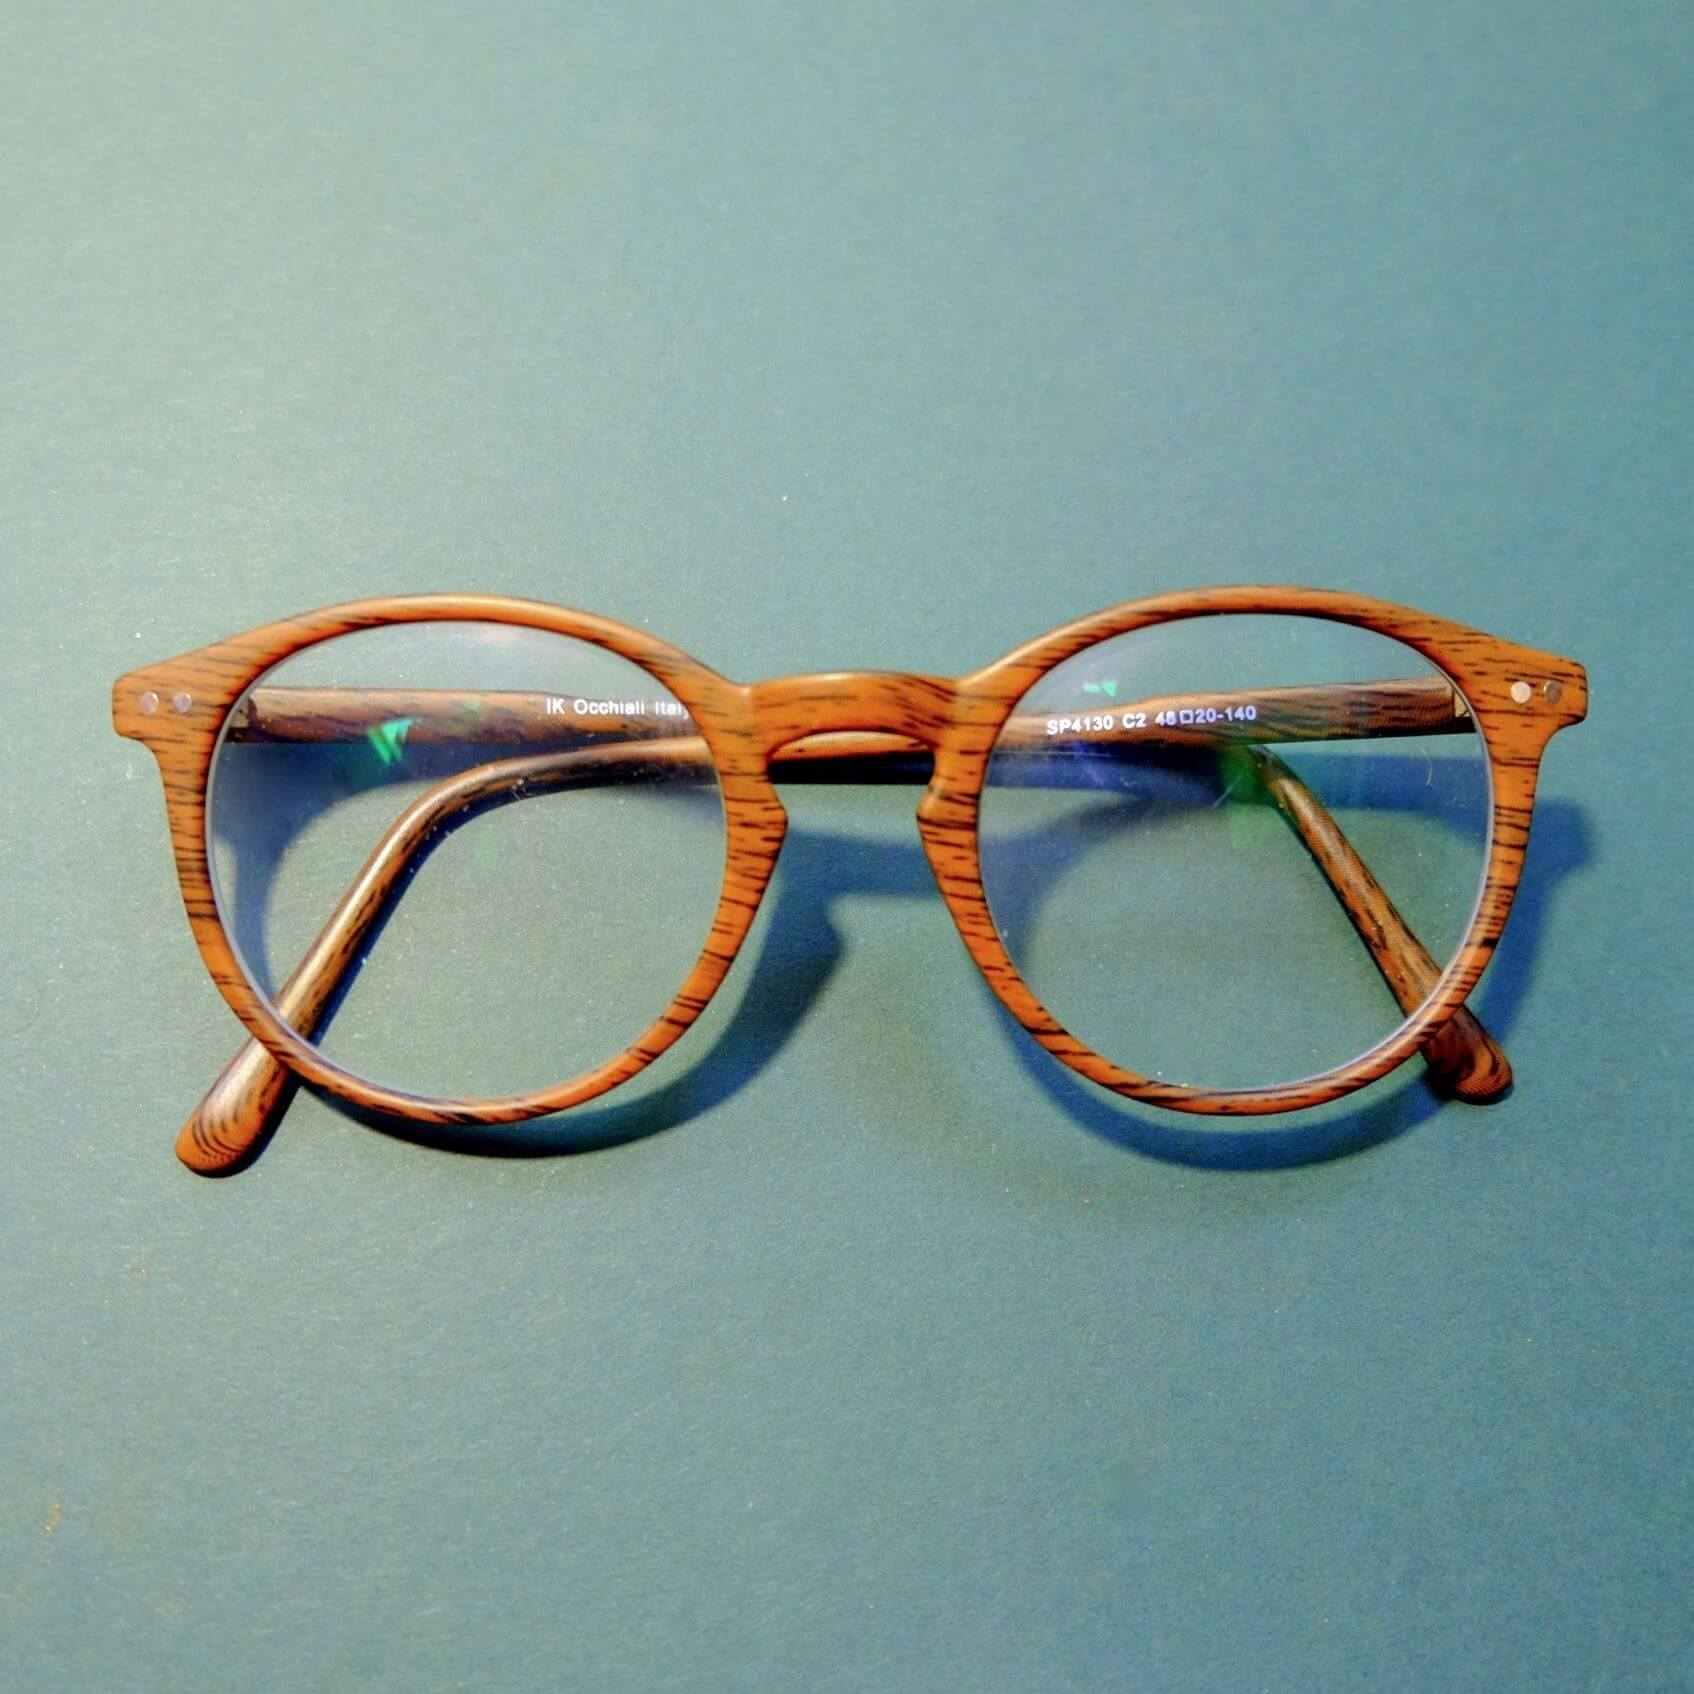 A brown pair of glasses. They are rounded, with a wooden pattern, against a light blue background.